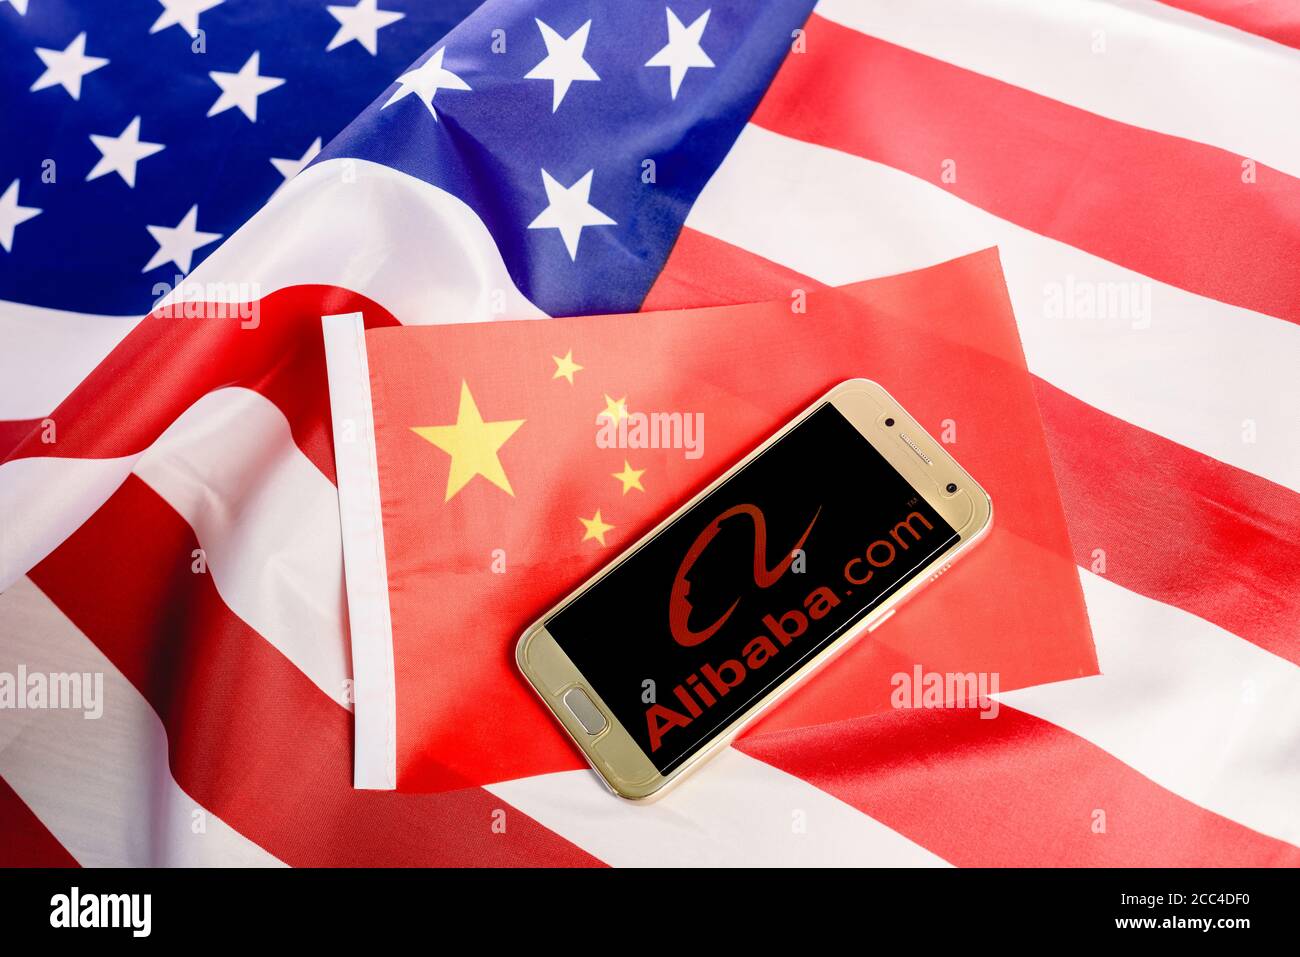 Valencia, Spain - August 17, 2020: Alibaba app on a mobile phone, Chinese app in conflict with the United States of America. Stock Photo